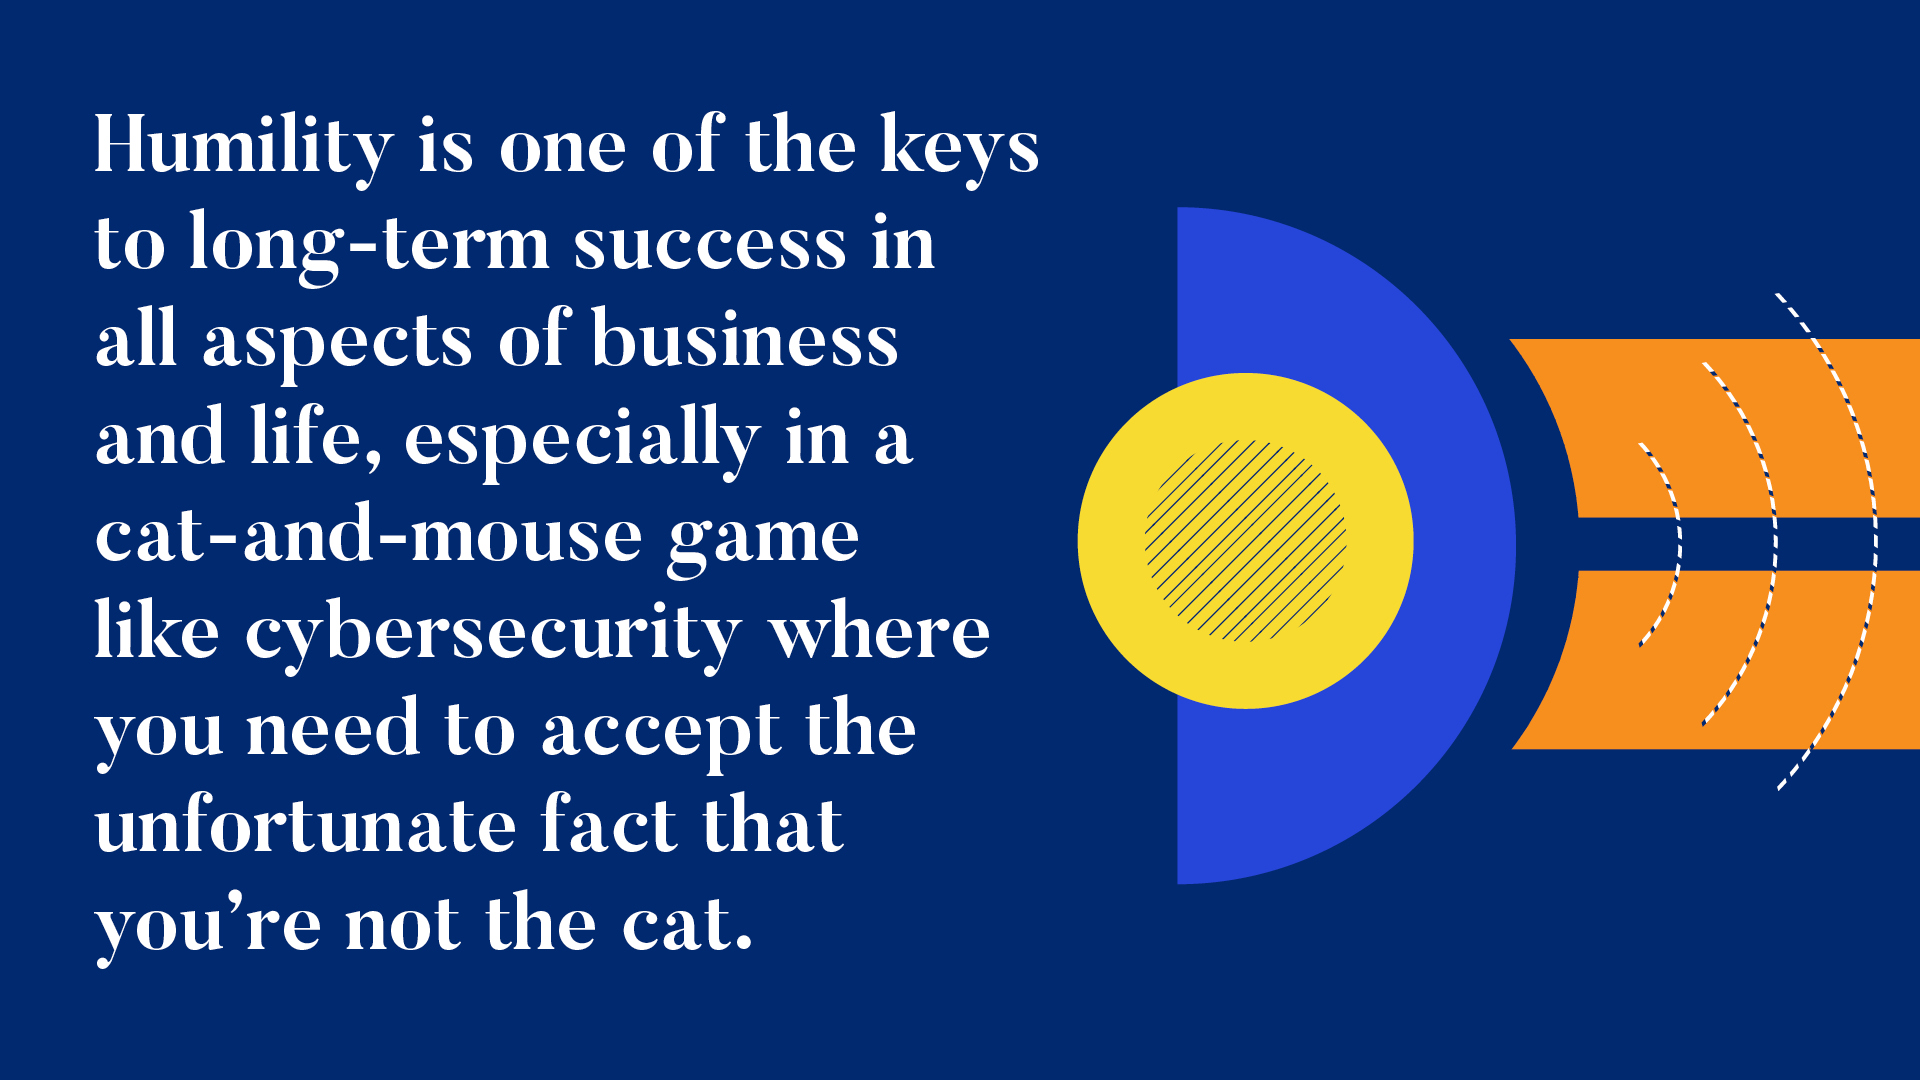 INFOGRAPHIC #5


Humility is one of the keys to long-term success in all aspects of business and life, especially in a cat-and-mouse game like cybersecurity where you need to accept the unfortunate fact that you’re not the cat. 
